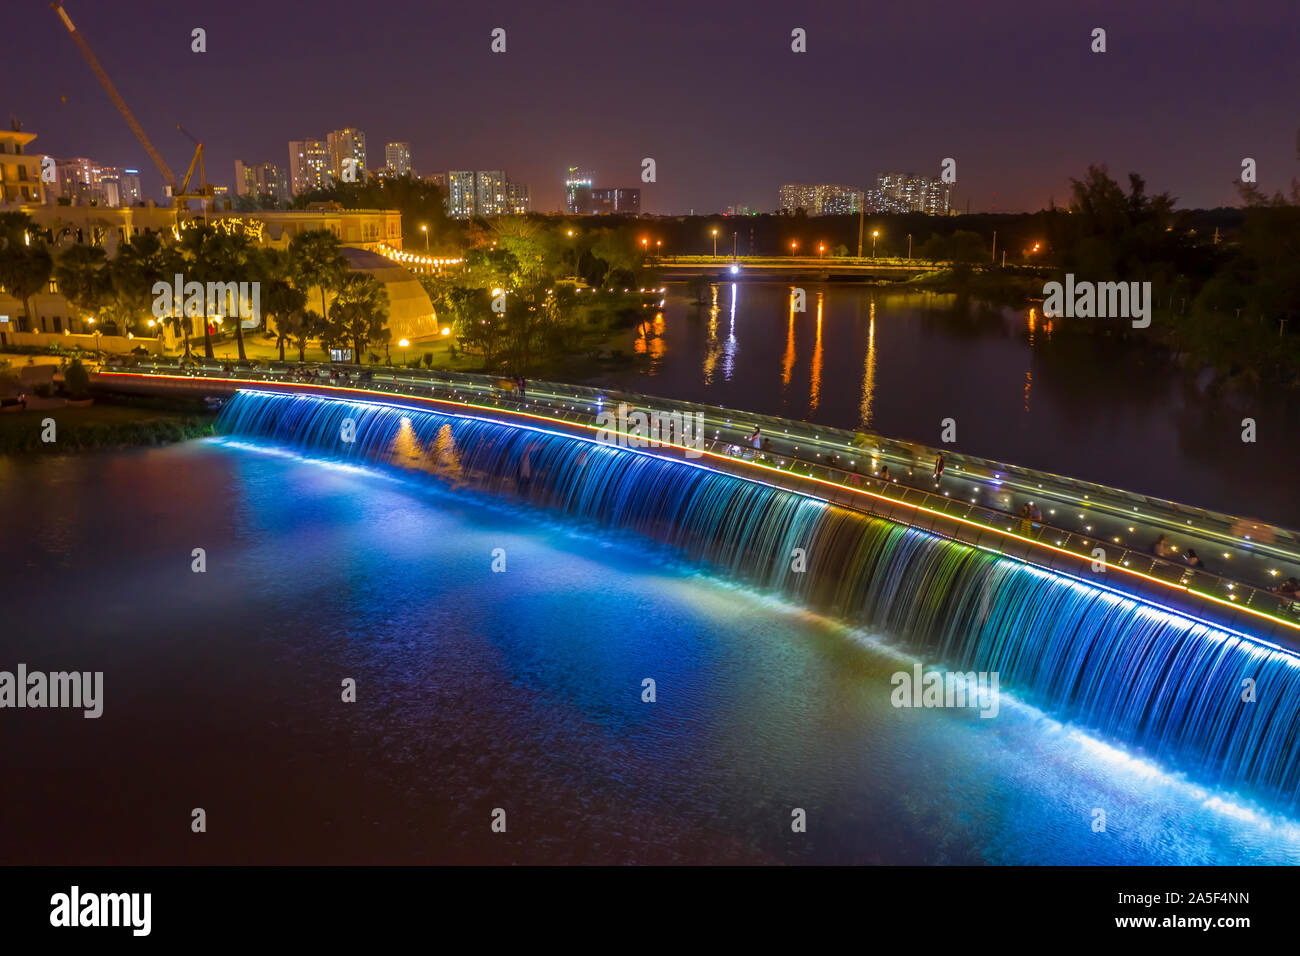 Anh Sao or Starlight Bridge is a pedestrian bridge with  waterfall and beautiful colored lighting on the Saigon River. It is a tourist attraction Stock Photo